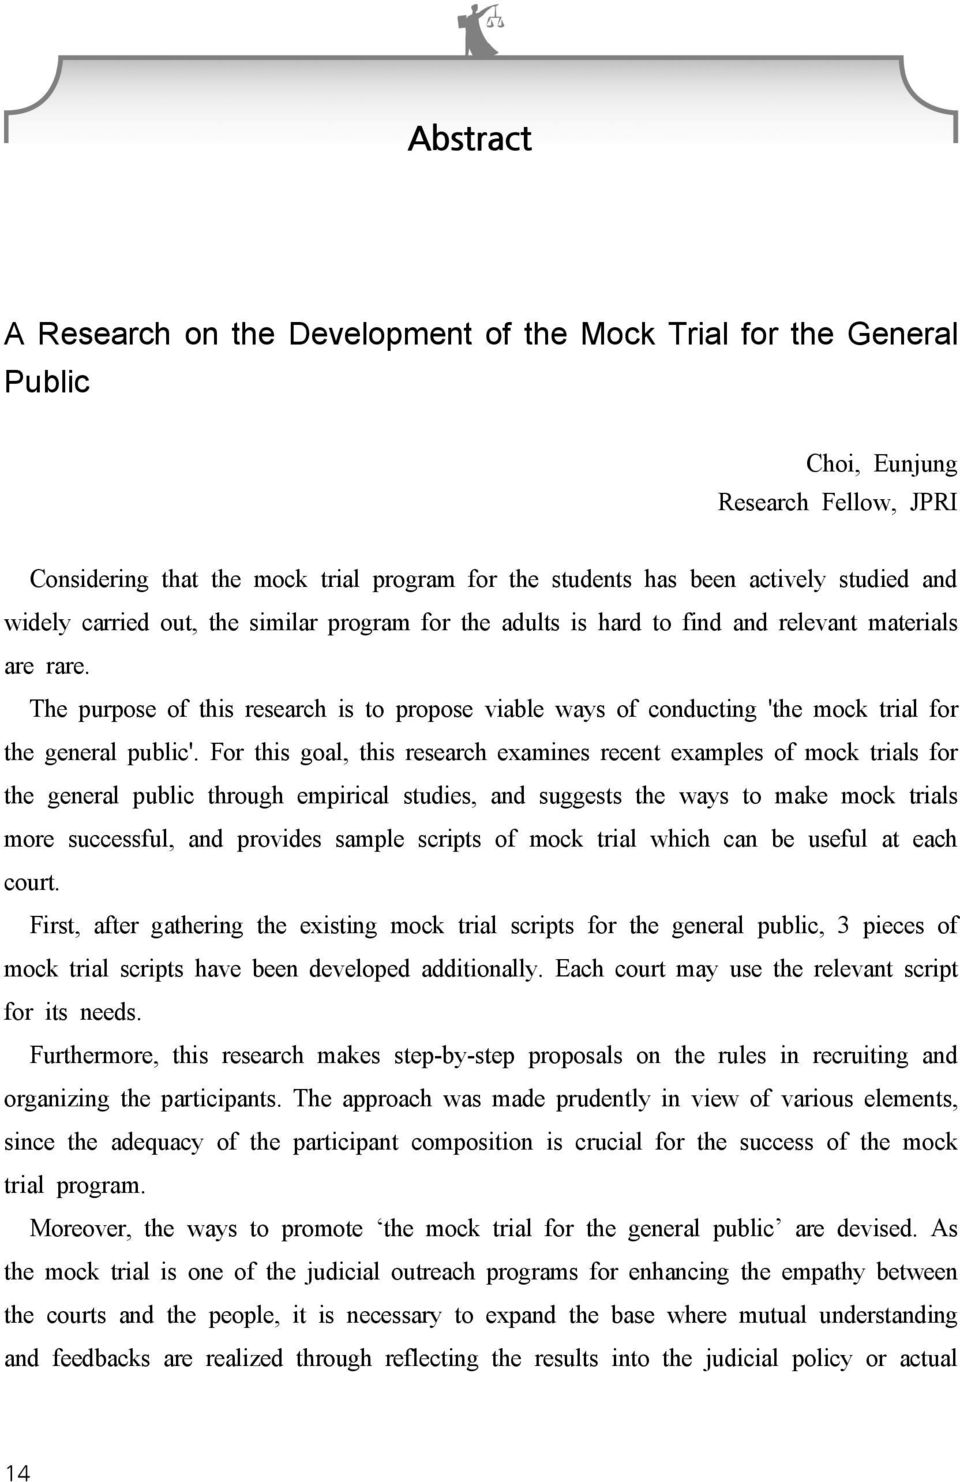 The purpose of this research is to propose viable ways of conducting 'the mock trial for the general public'.